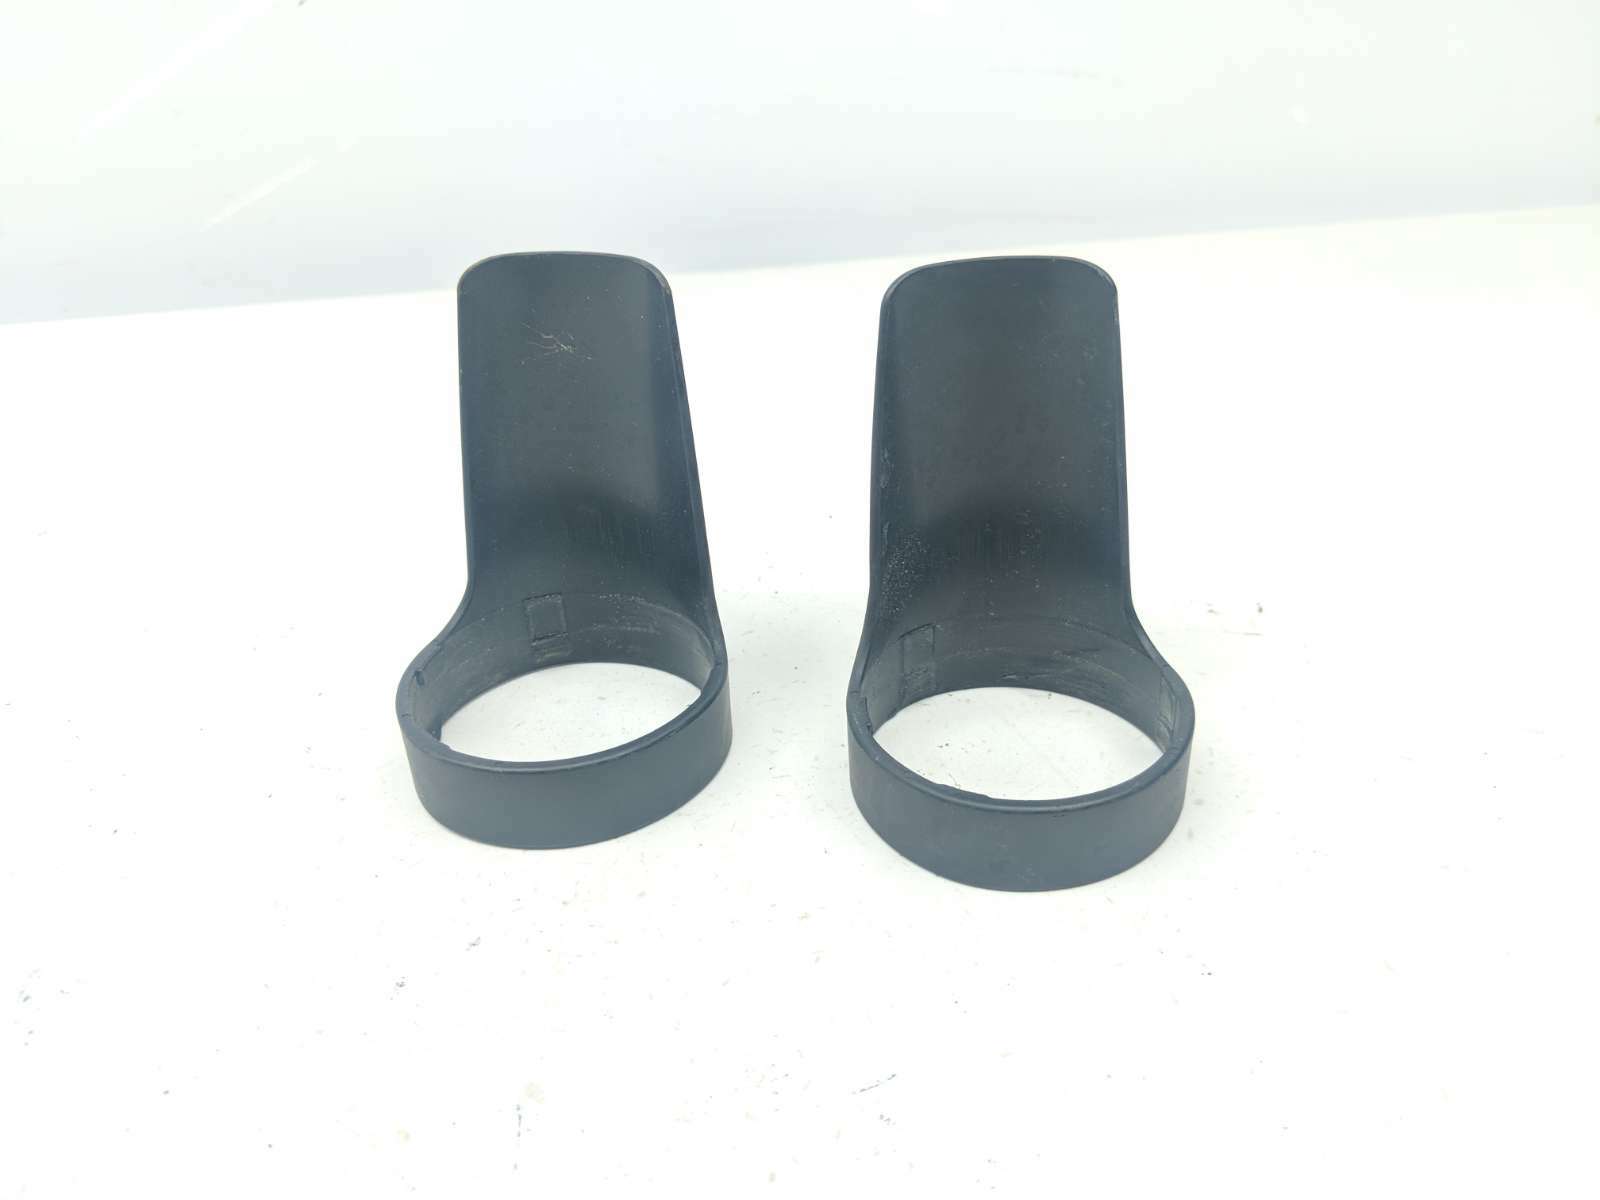 15 Triumph Thruxton 900 Front Fork Guard Covers